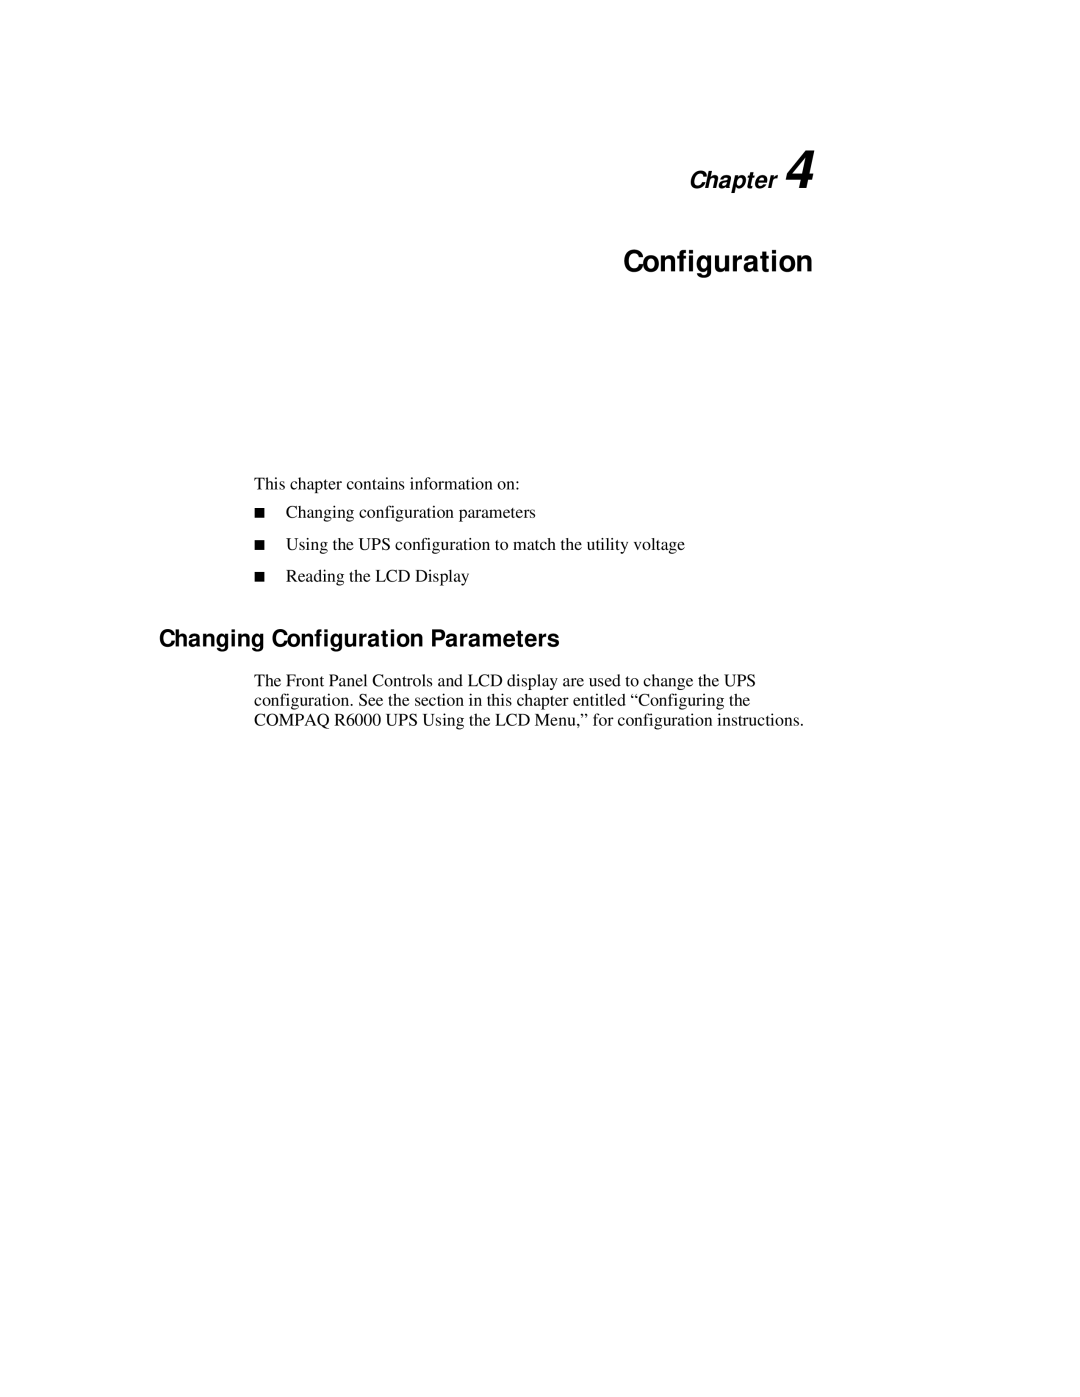 Compaq R6000 Series manual Changing Configuration Parameters, Chapter 